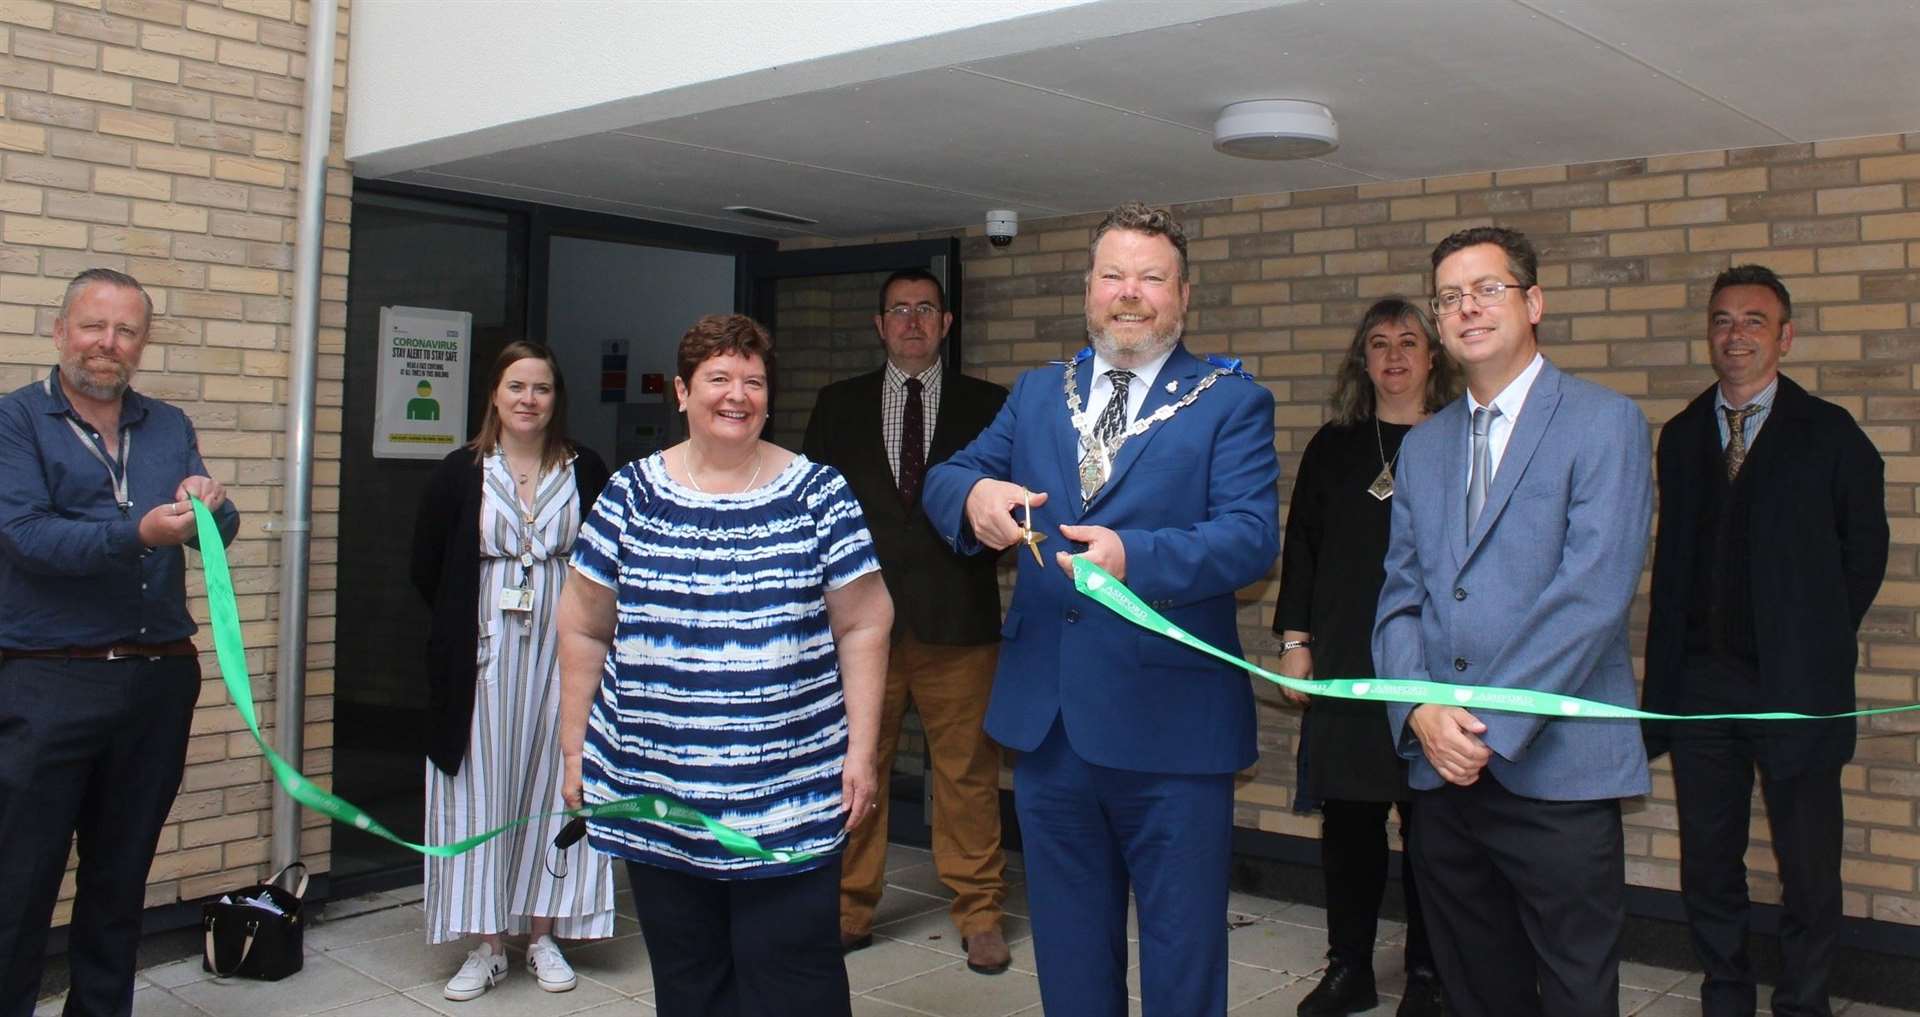 Mayor Cllr Callum Knowles cut the ribbon earlier this month